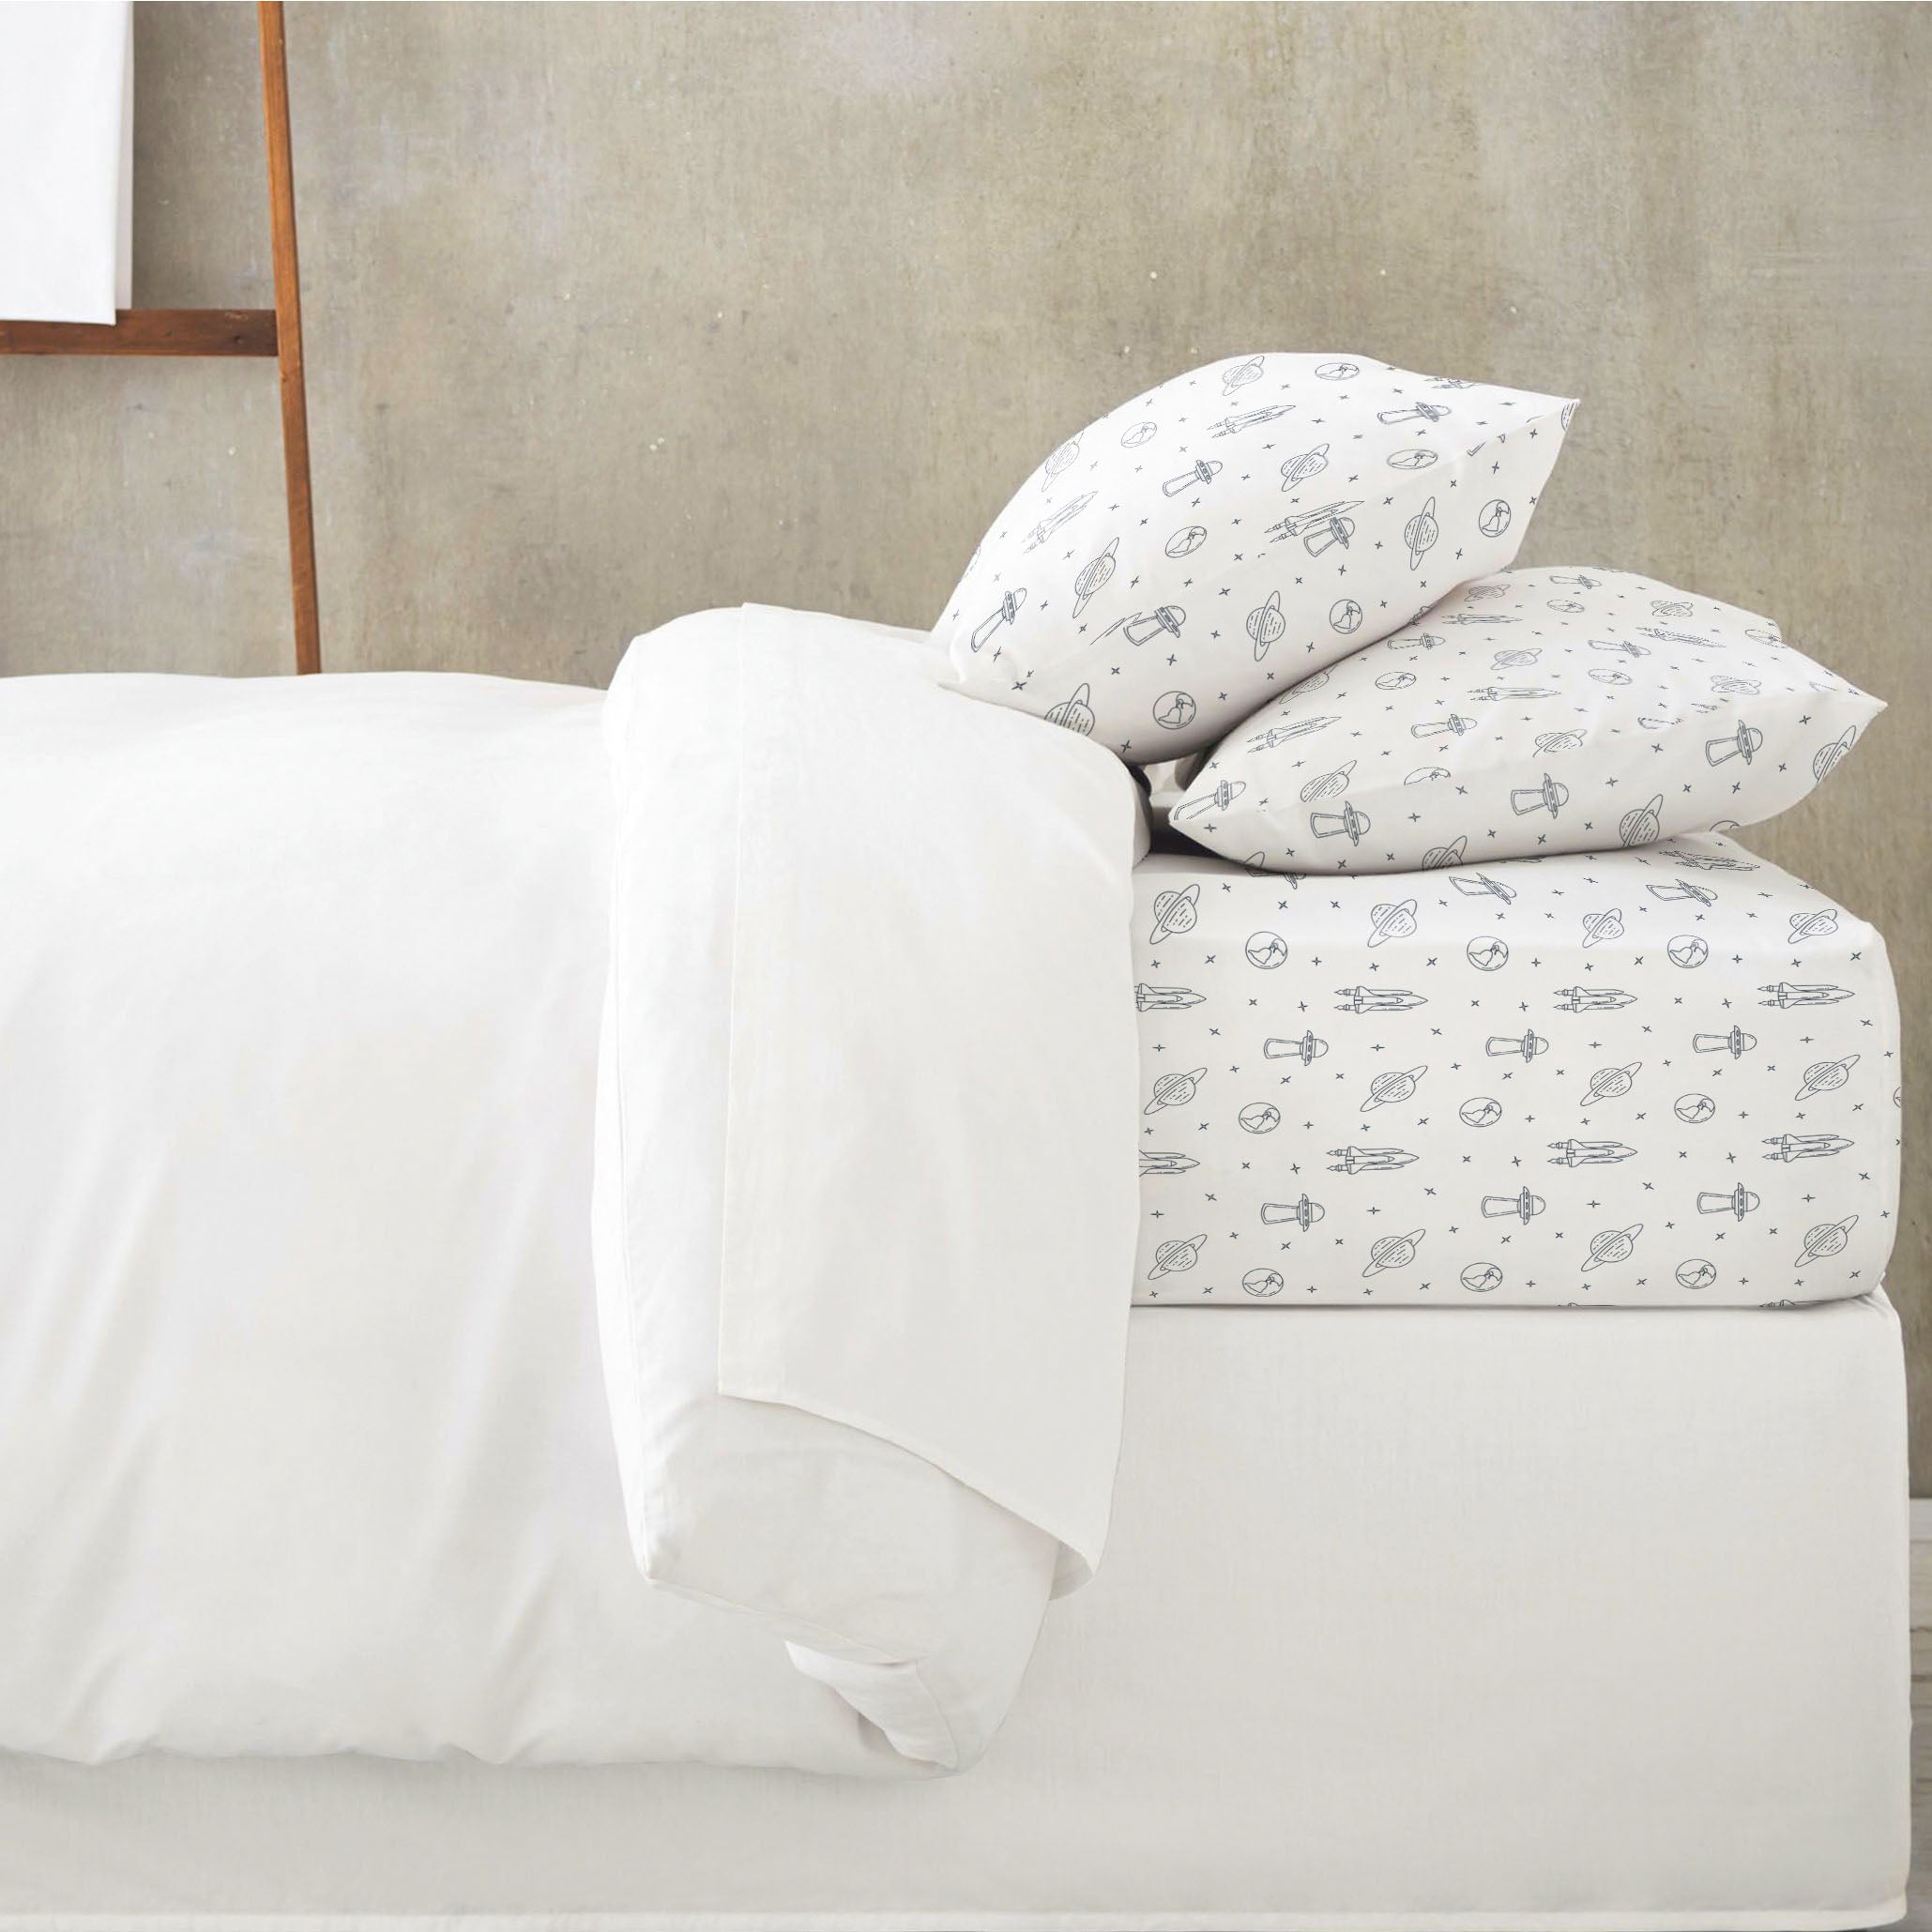 A neatly made bed with white sheets and pillowcases featuring a playful pattern of small, abstract designs, set against a soft gray background using the Organic Cotton Fitted Sheet Set - Celestial by Makemake Organics.